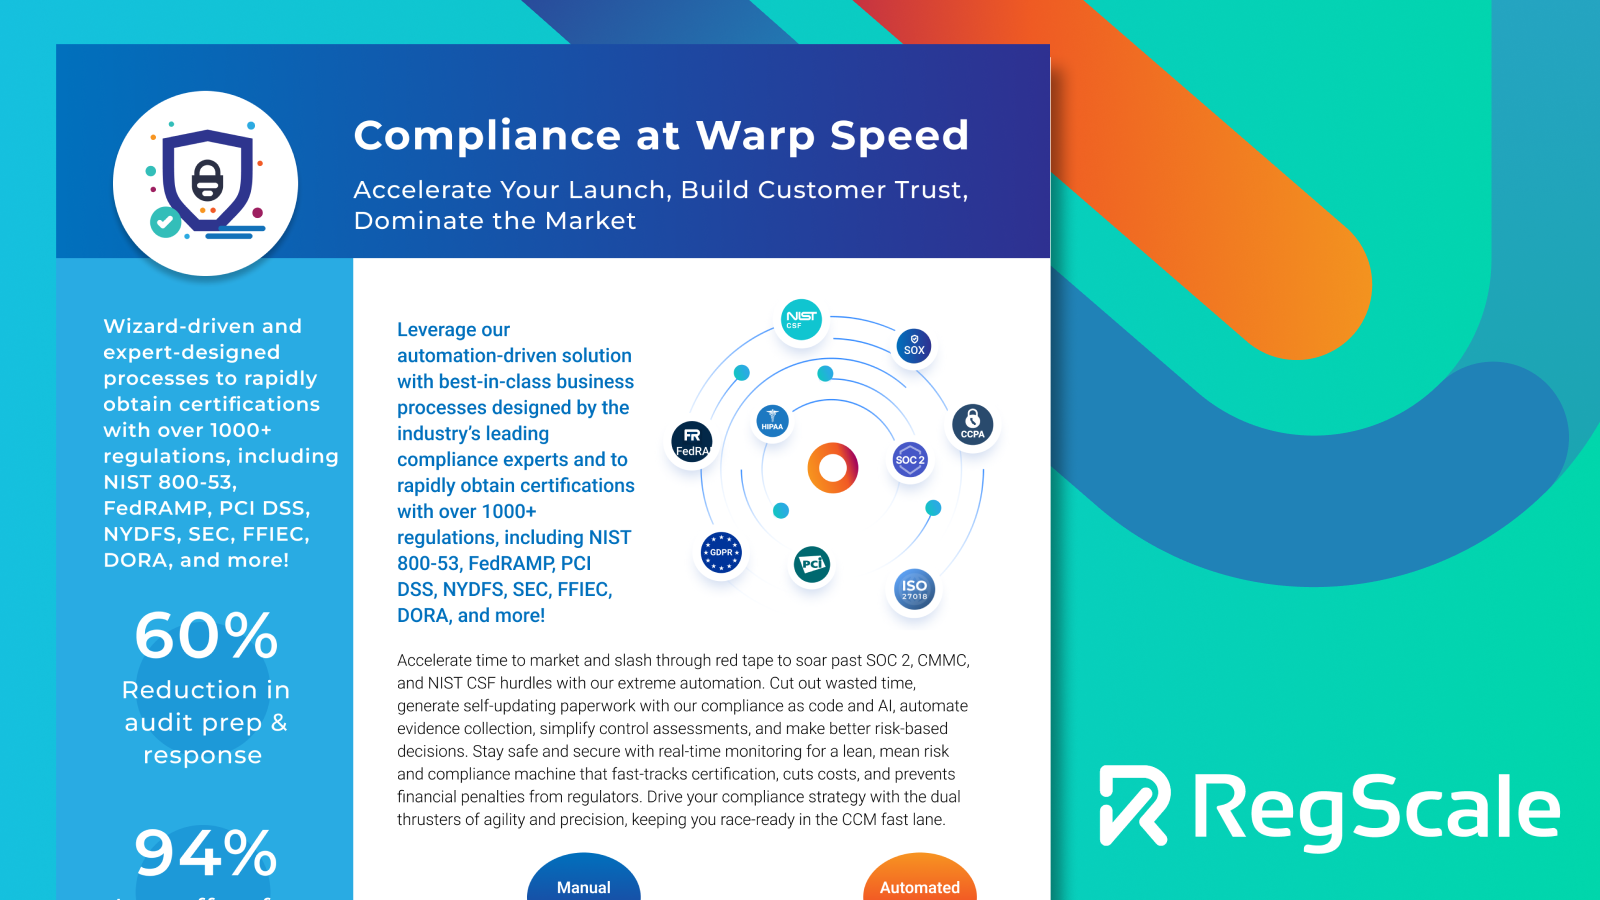 LP-Whitepaper-Compliance-at-Warp-Speed_-Accelerate-Your-Launch-Build-Customer-Trust-Dominate-the-Market